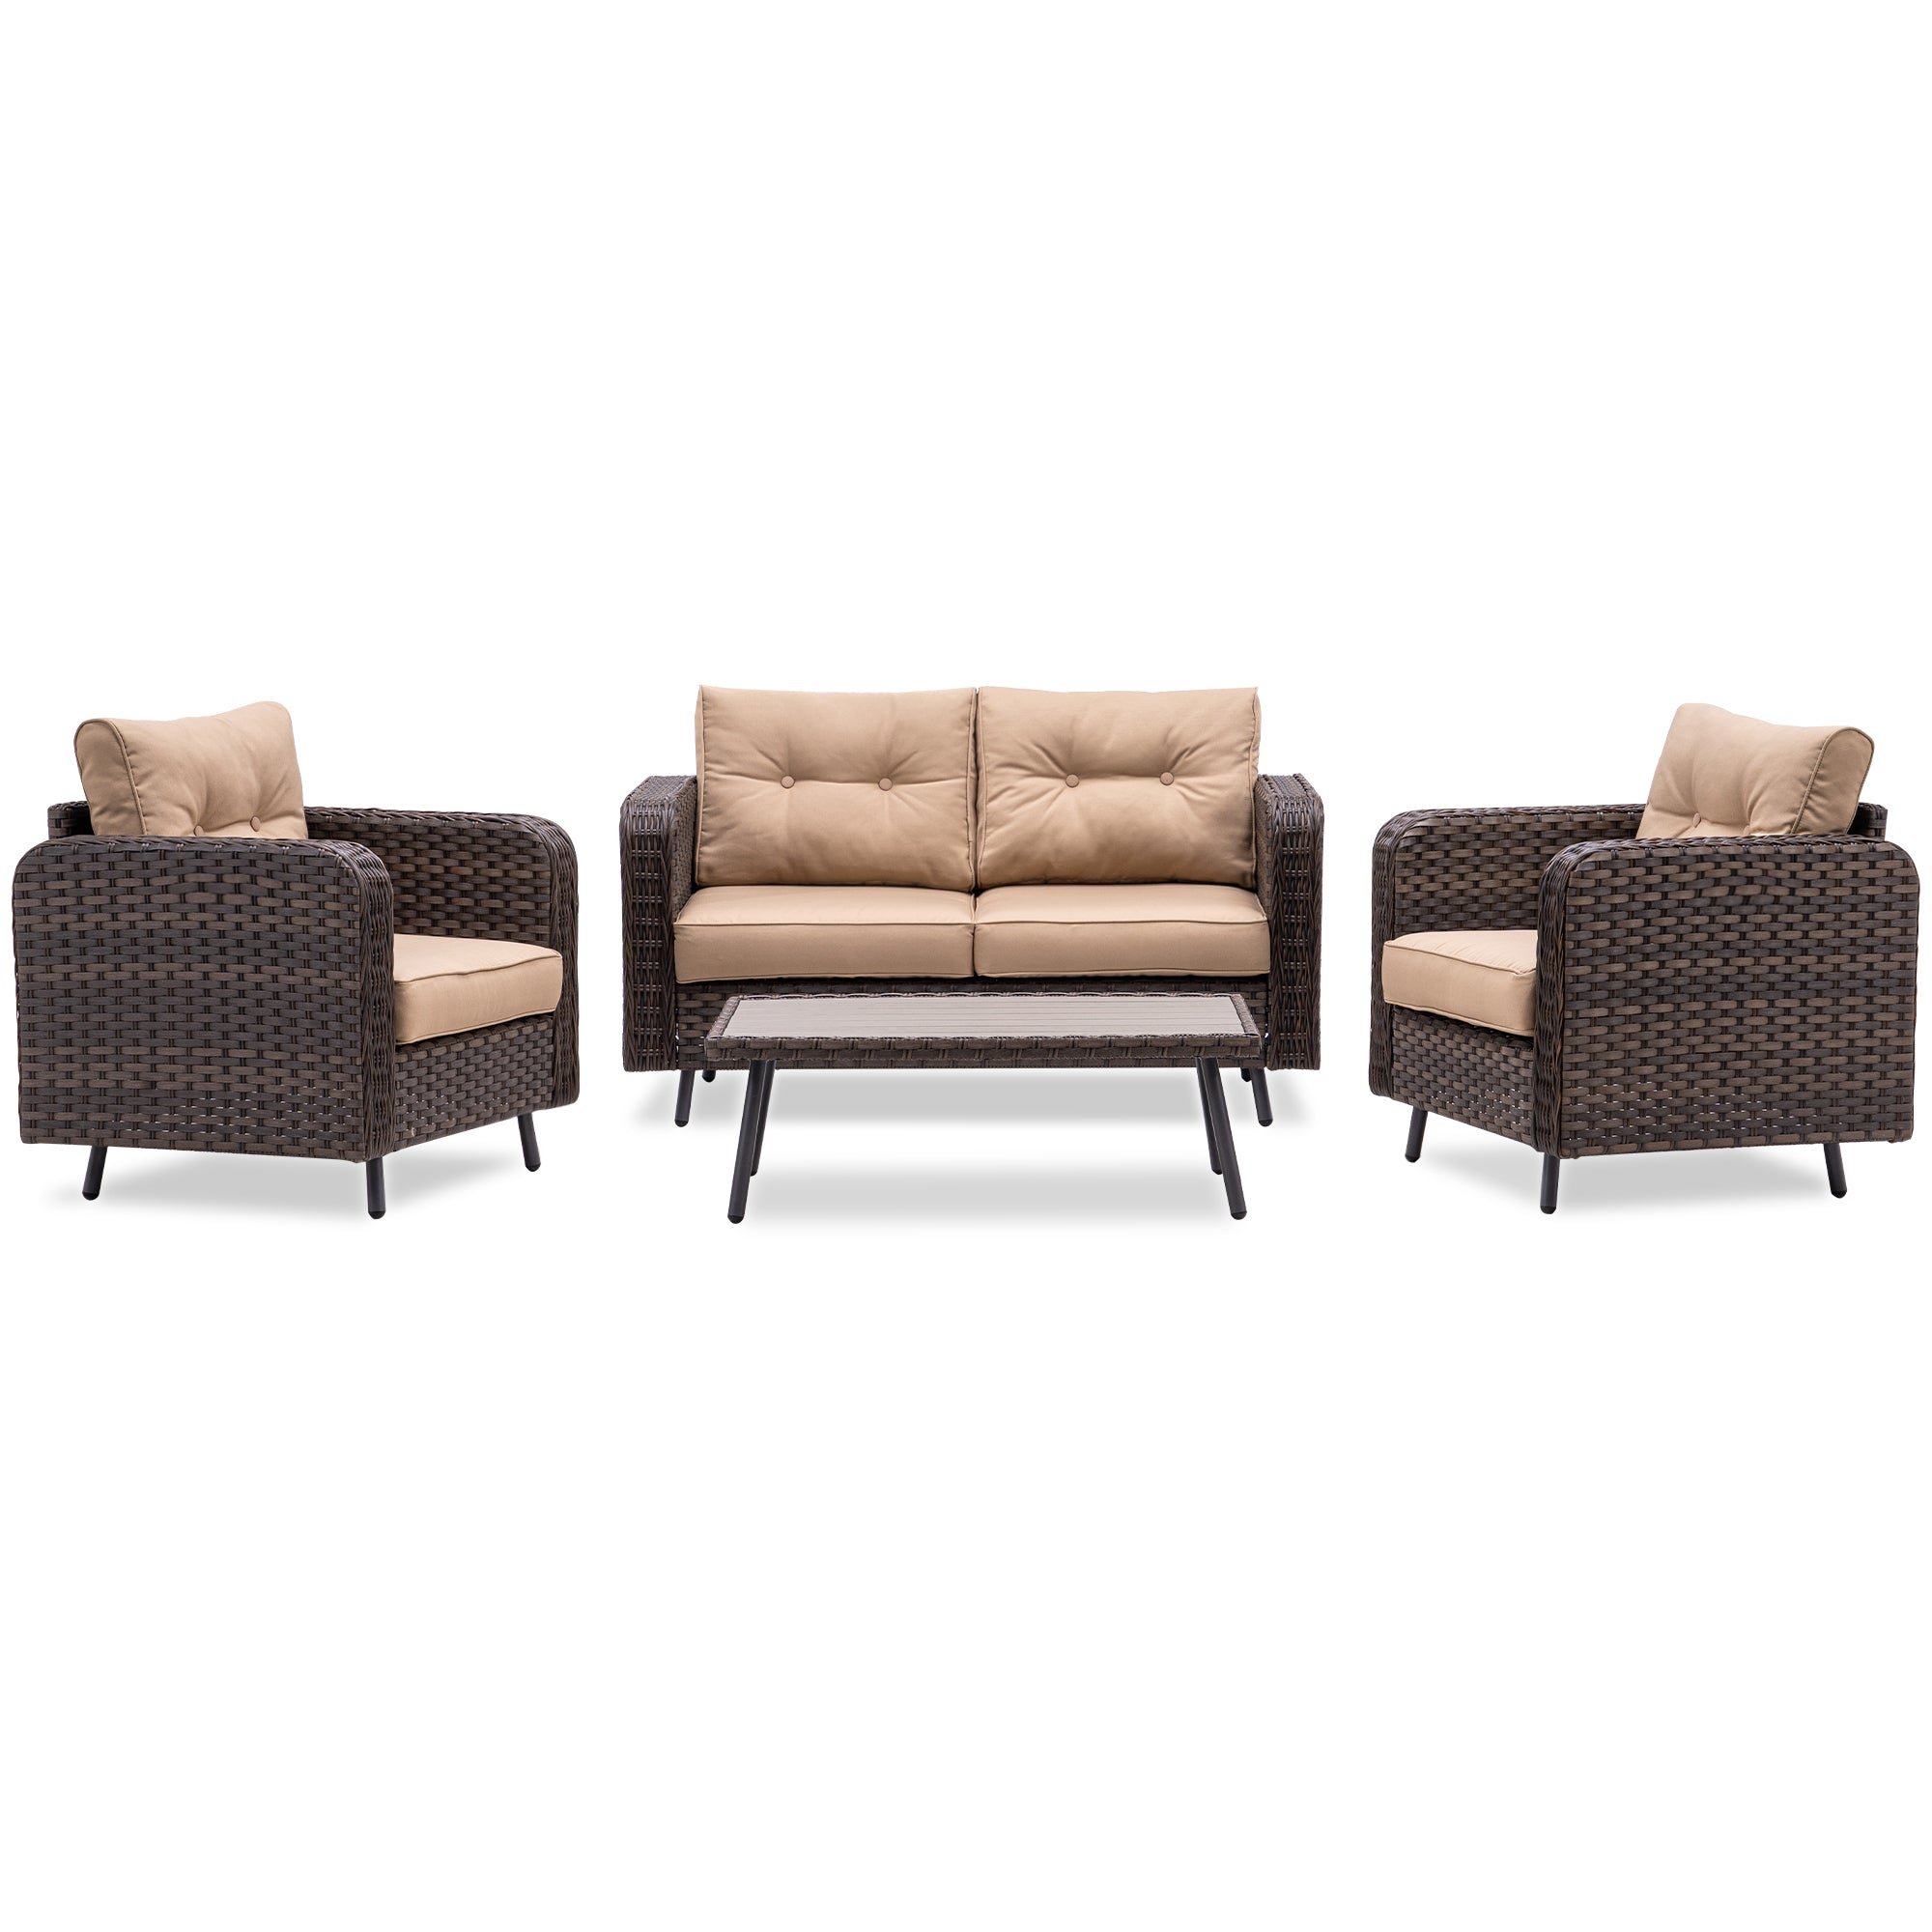 MCombo 4 Piece Outdoor Patio Furniture Sets, Brown Wicker Patio Conversation Set with Cushions and Coffee Table, Rattan Patio Furniture Sofa Set for Garden,Porch and Deck 6082-9541BR